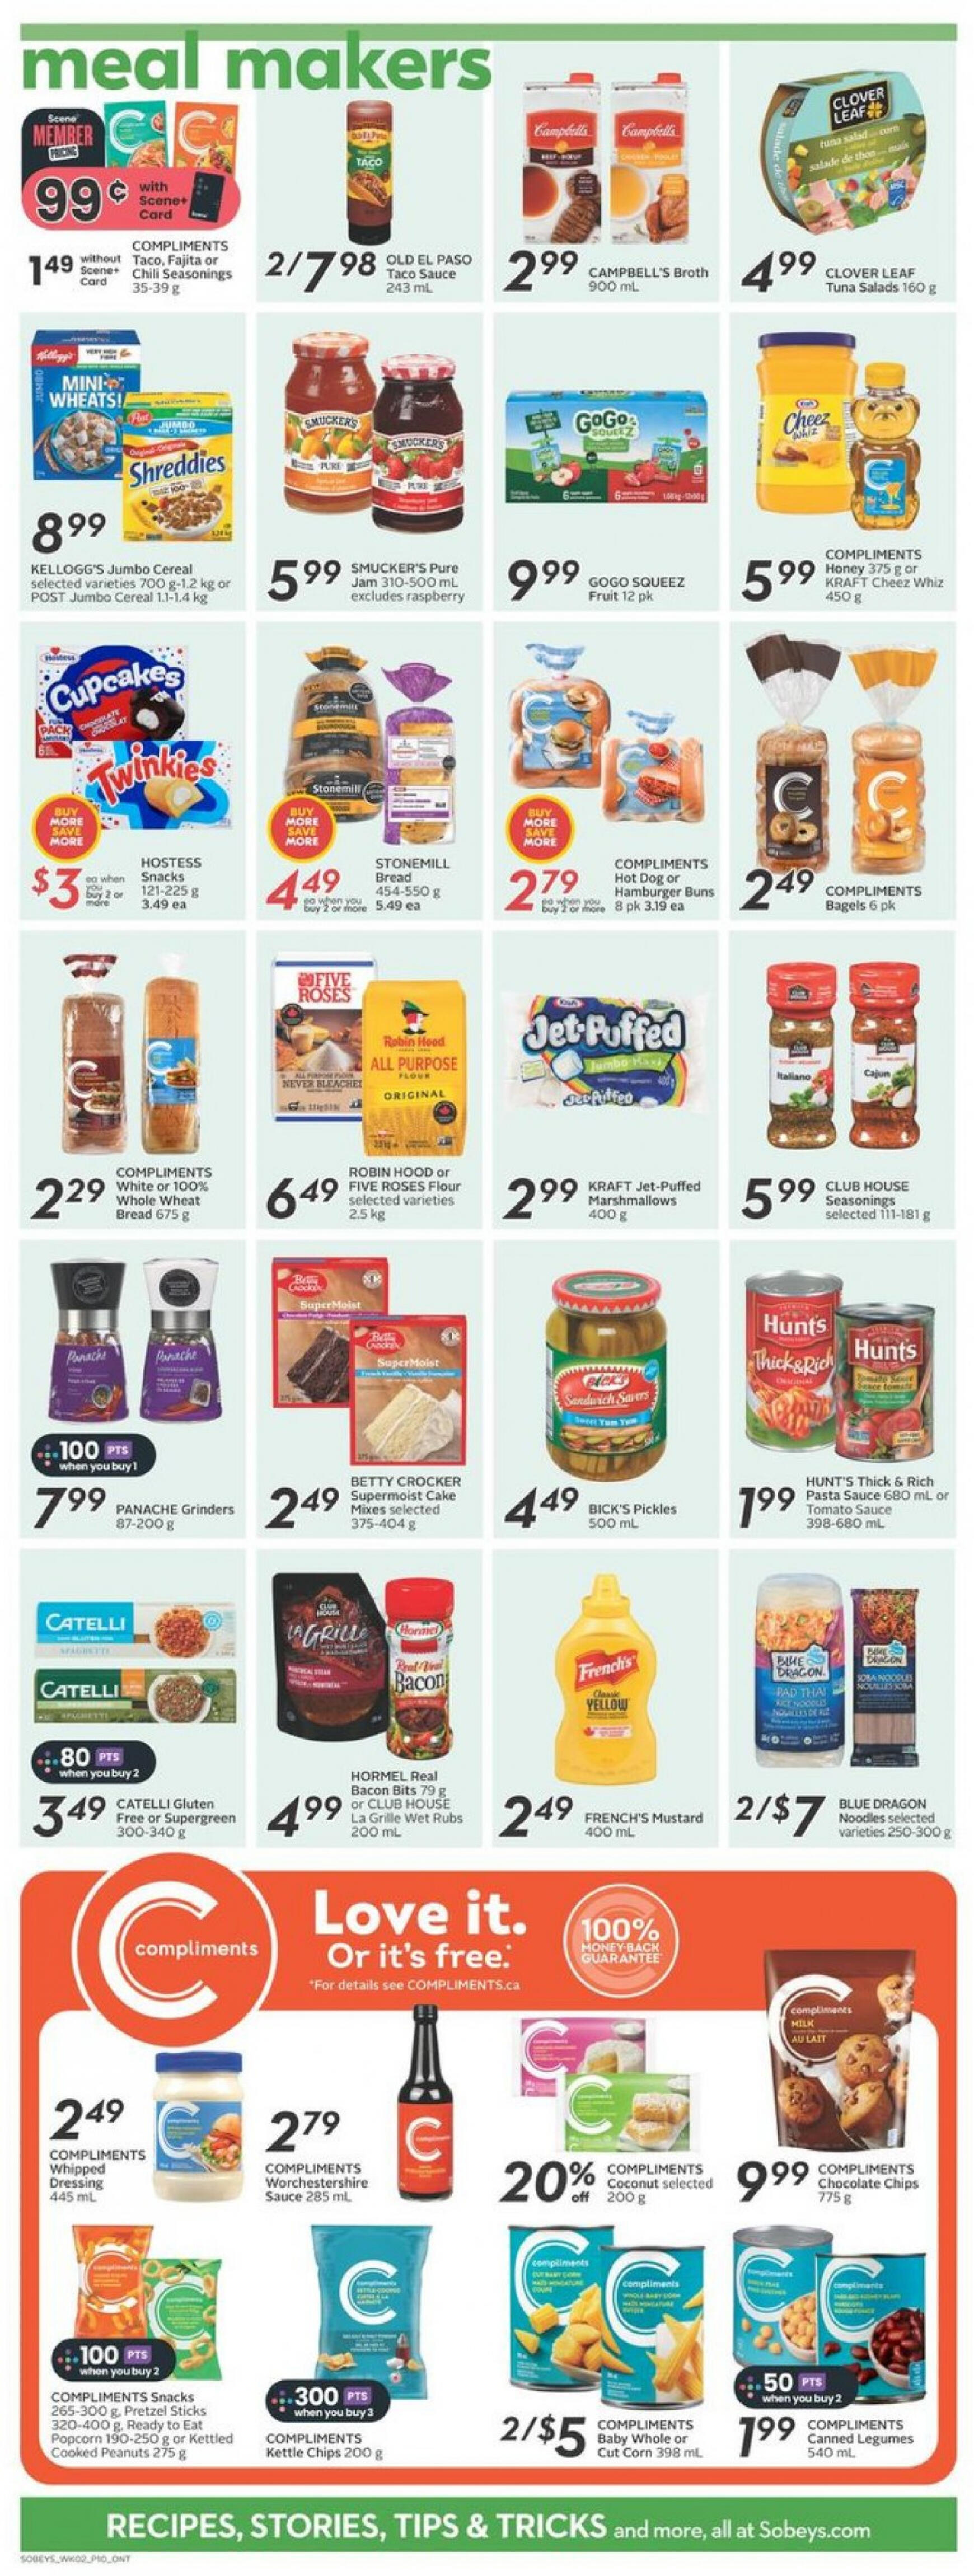 sobeys - Sobeys - Weekly Flyer - Ontario flyer current 09.05. - 15.05. - page: 18